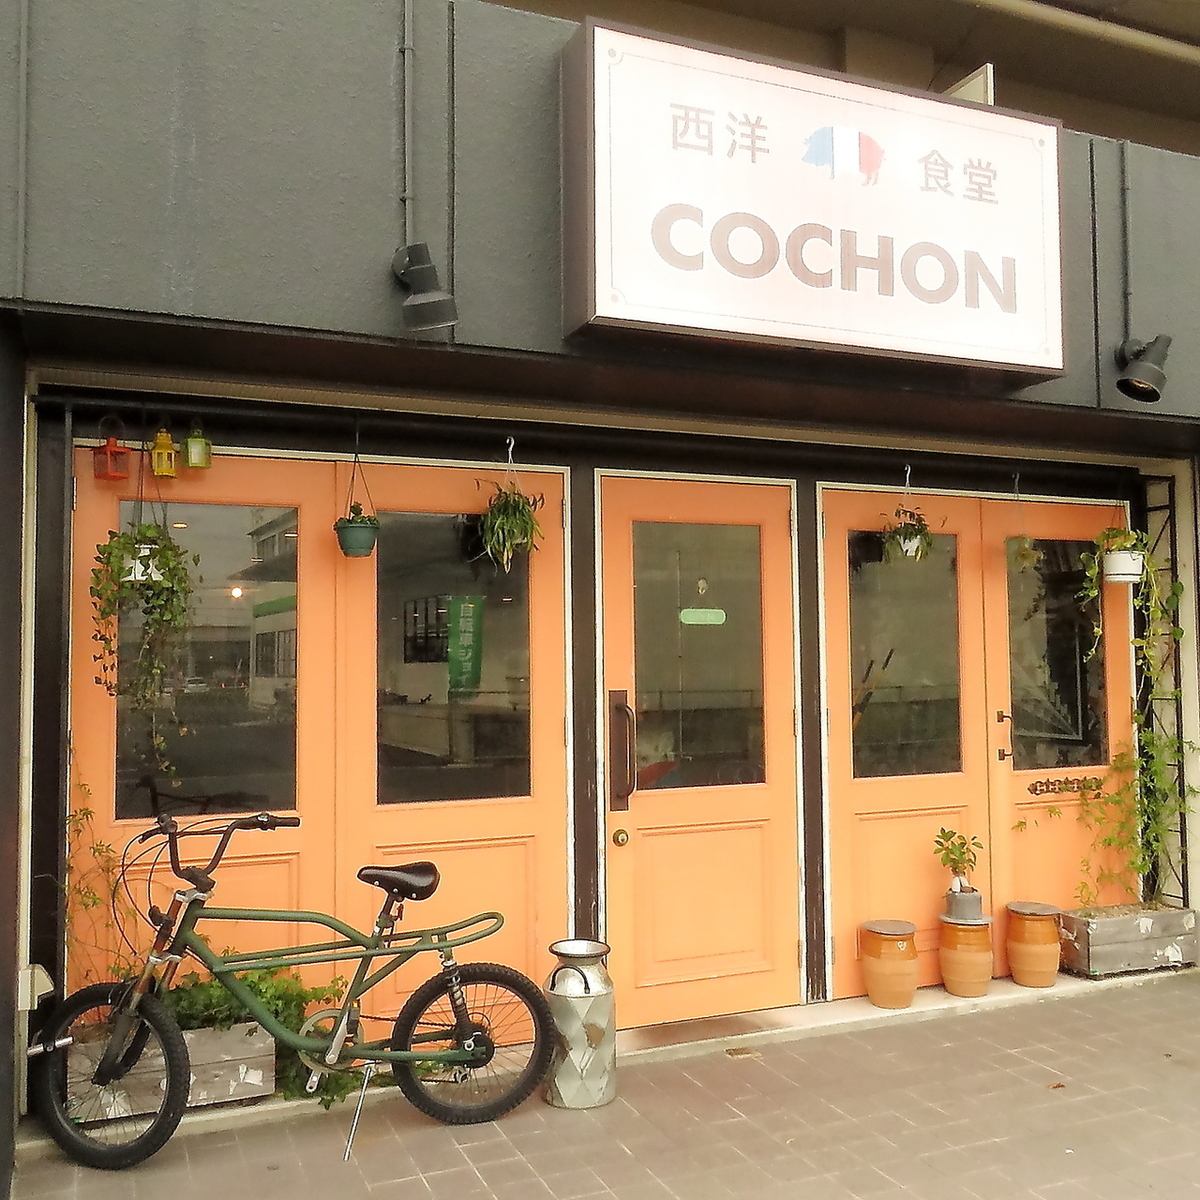 A 5-minute walk from Aoyama Station! Western restaurant Cochon, open for lunch and dinner ♪